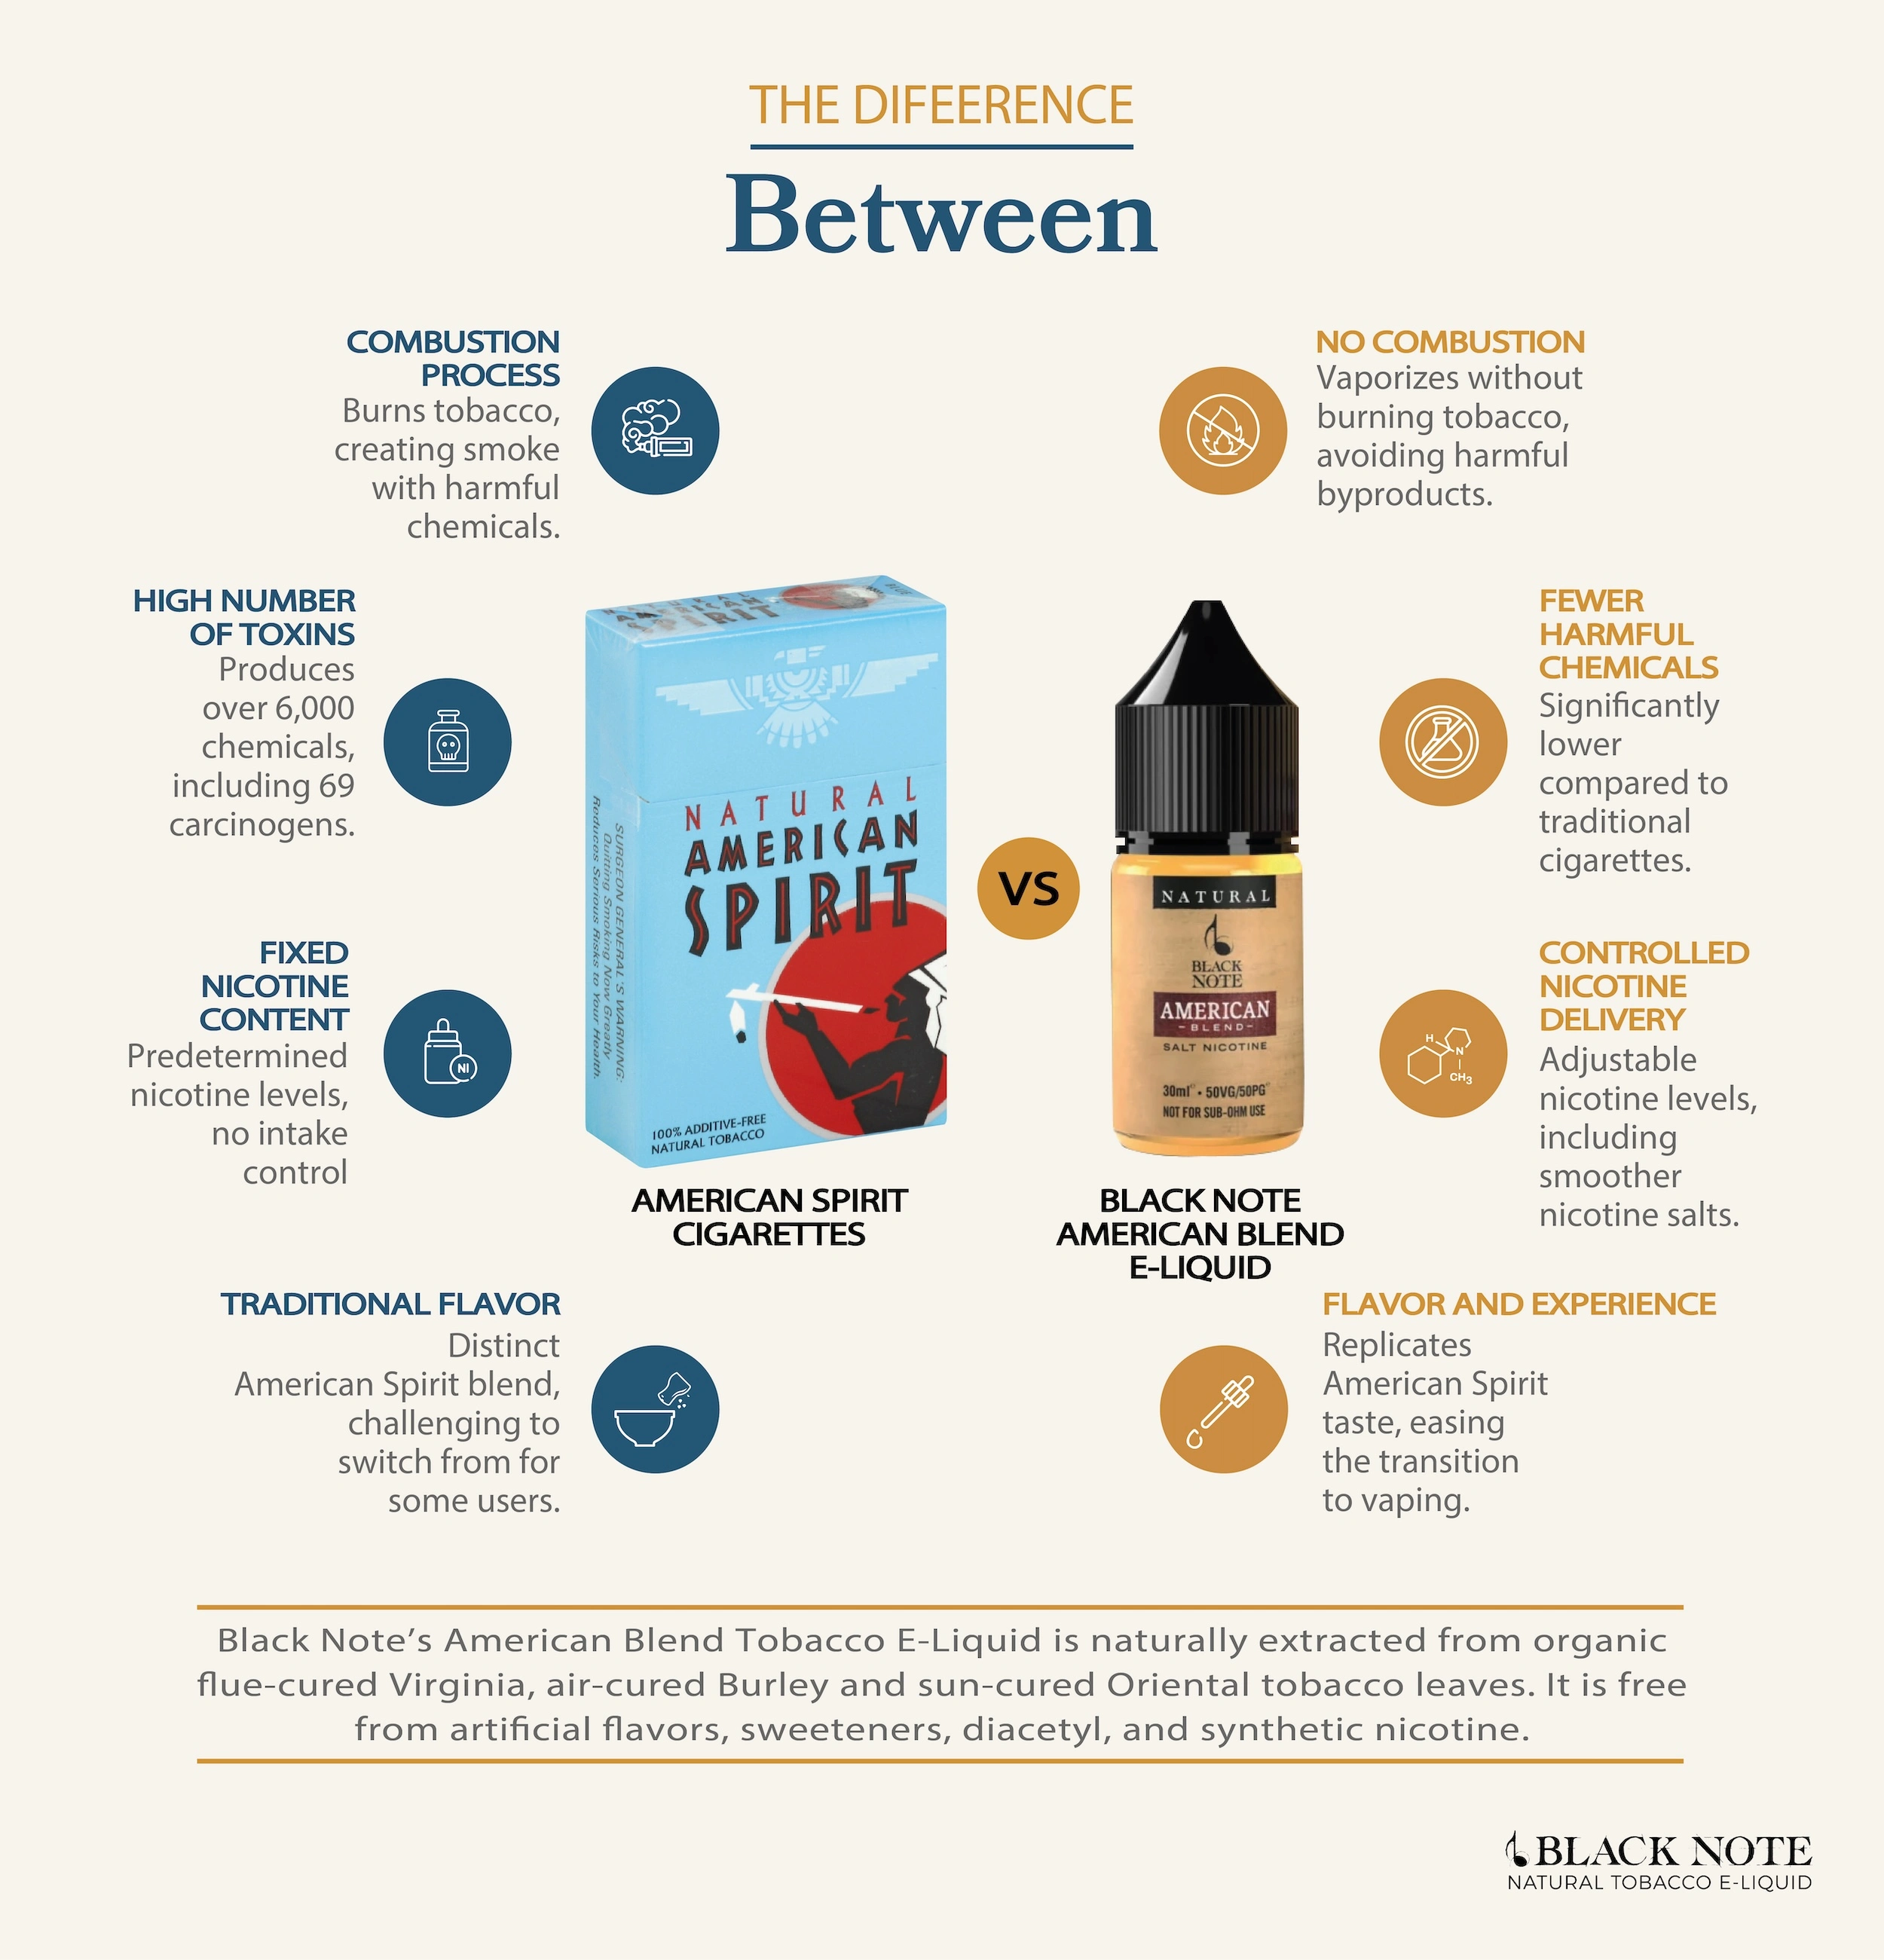 Infographic comparing Black Note American Blend to American Spirits Cigarettes